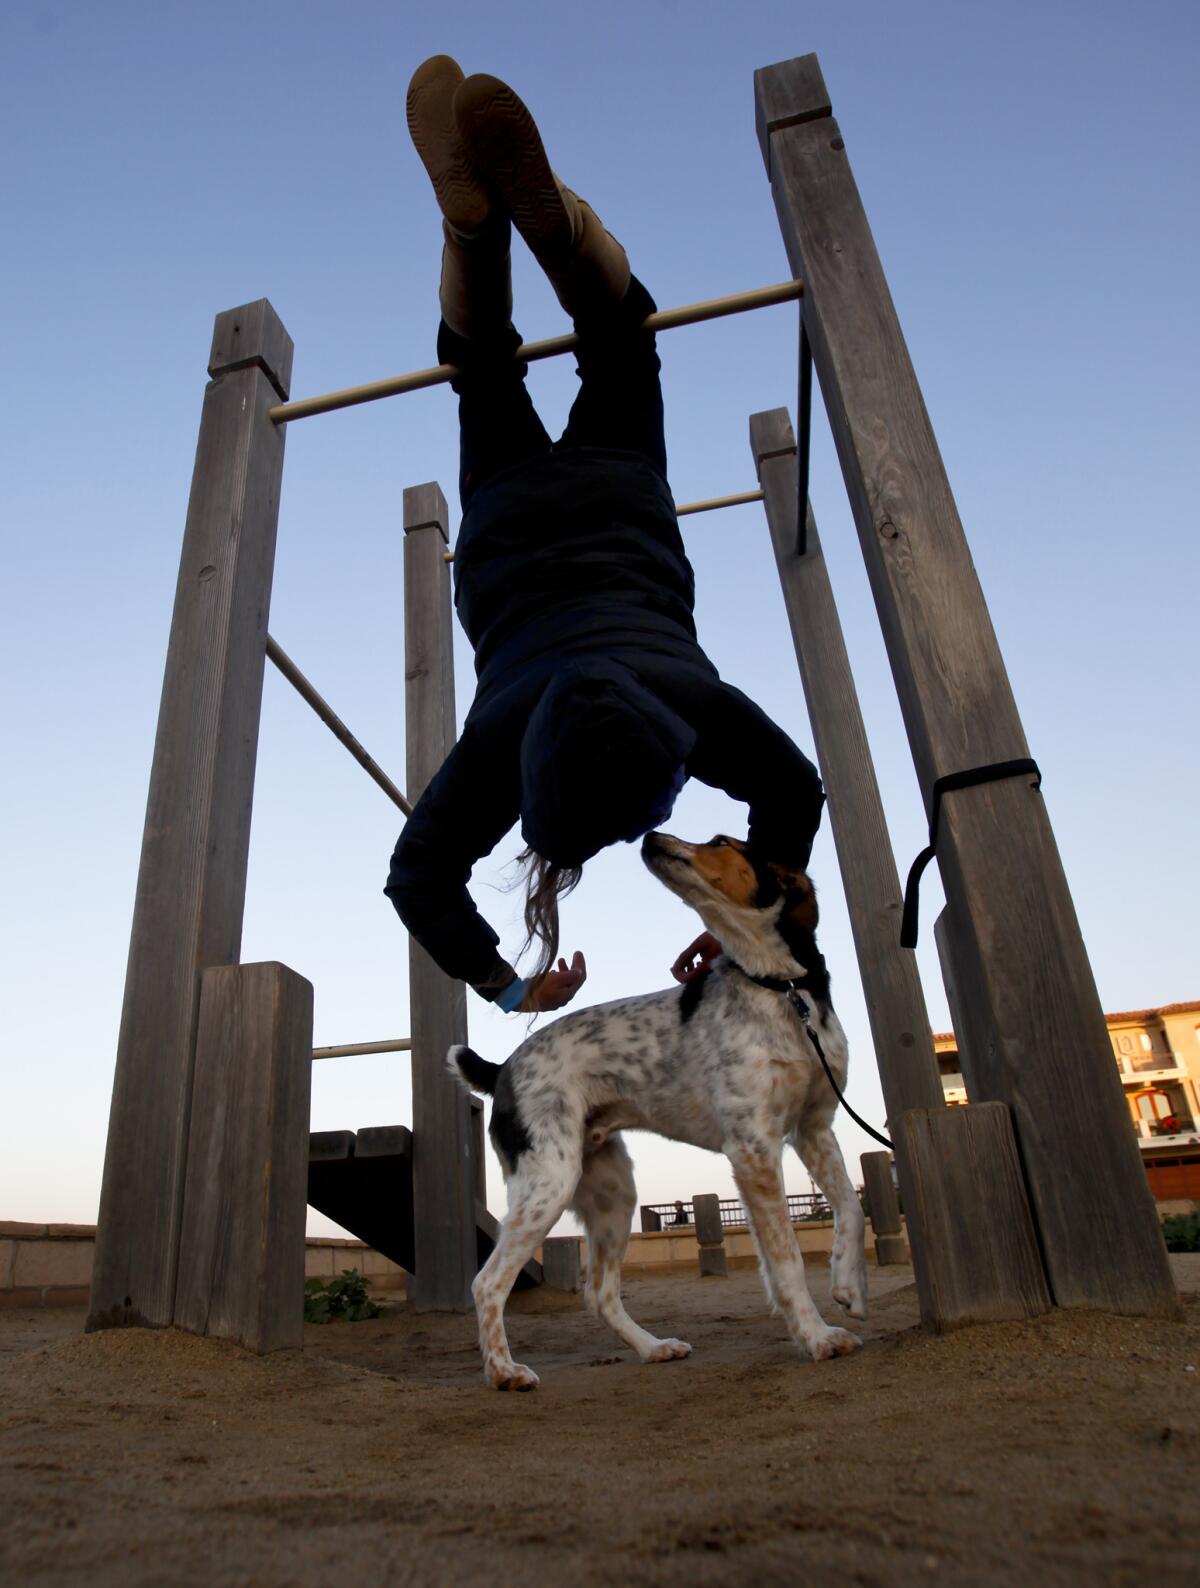 Karin Kendrick takes advantage of an outdoor gym in Manhattan Beach with her pal Lewy.